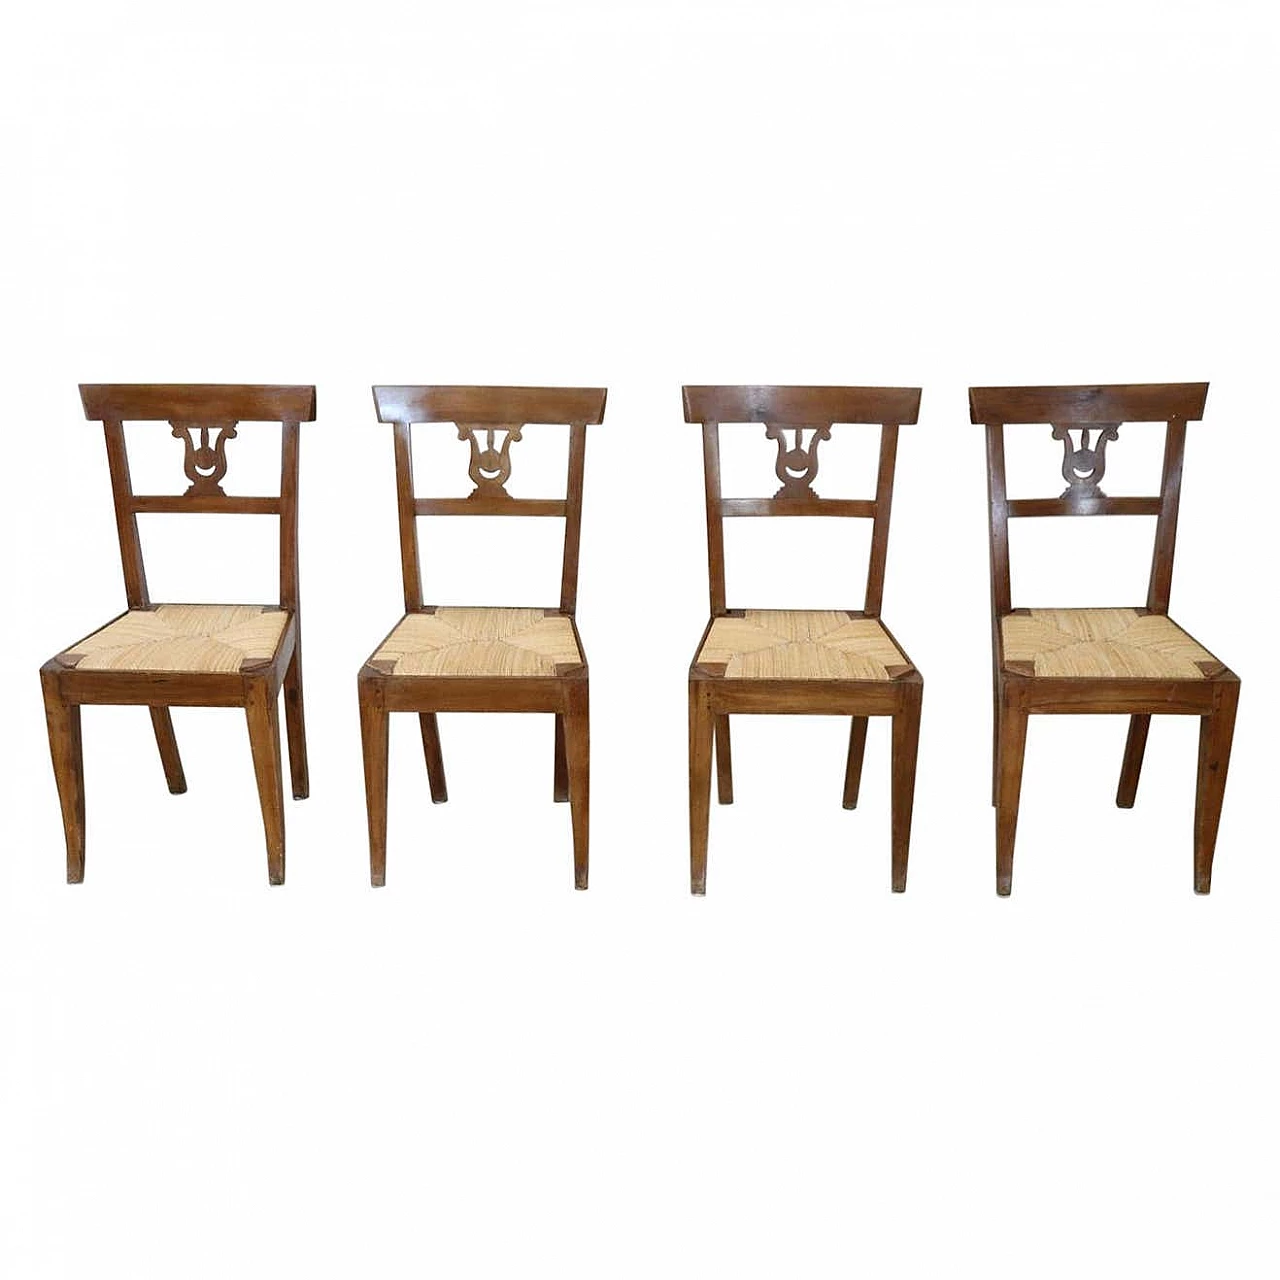 4 Empire walnut chairs with straw seat, early 19th century 1305330